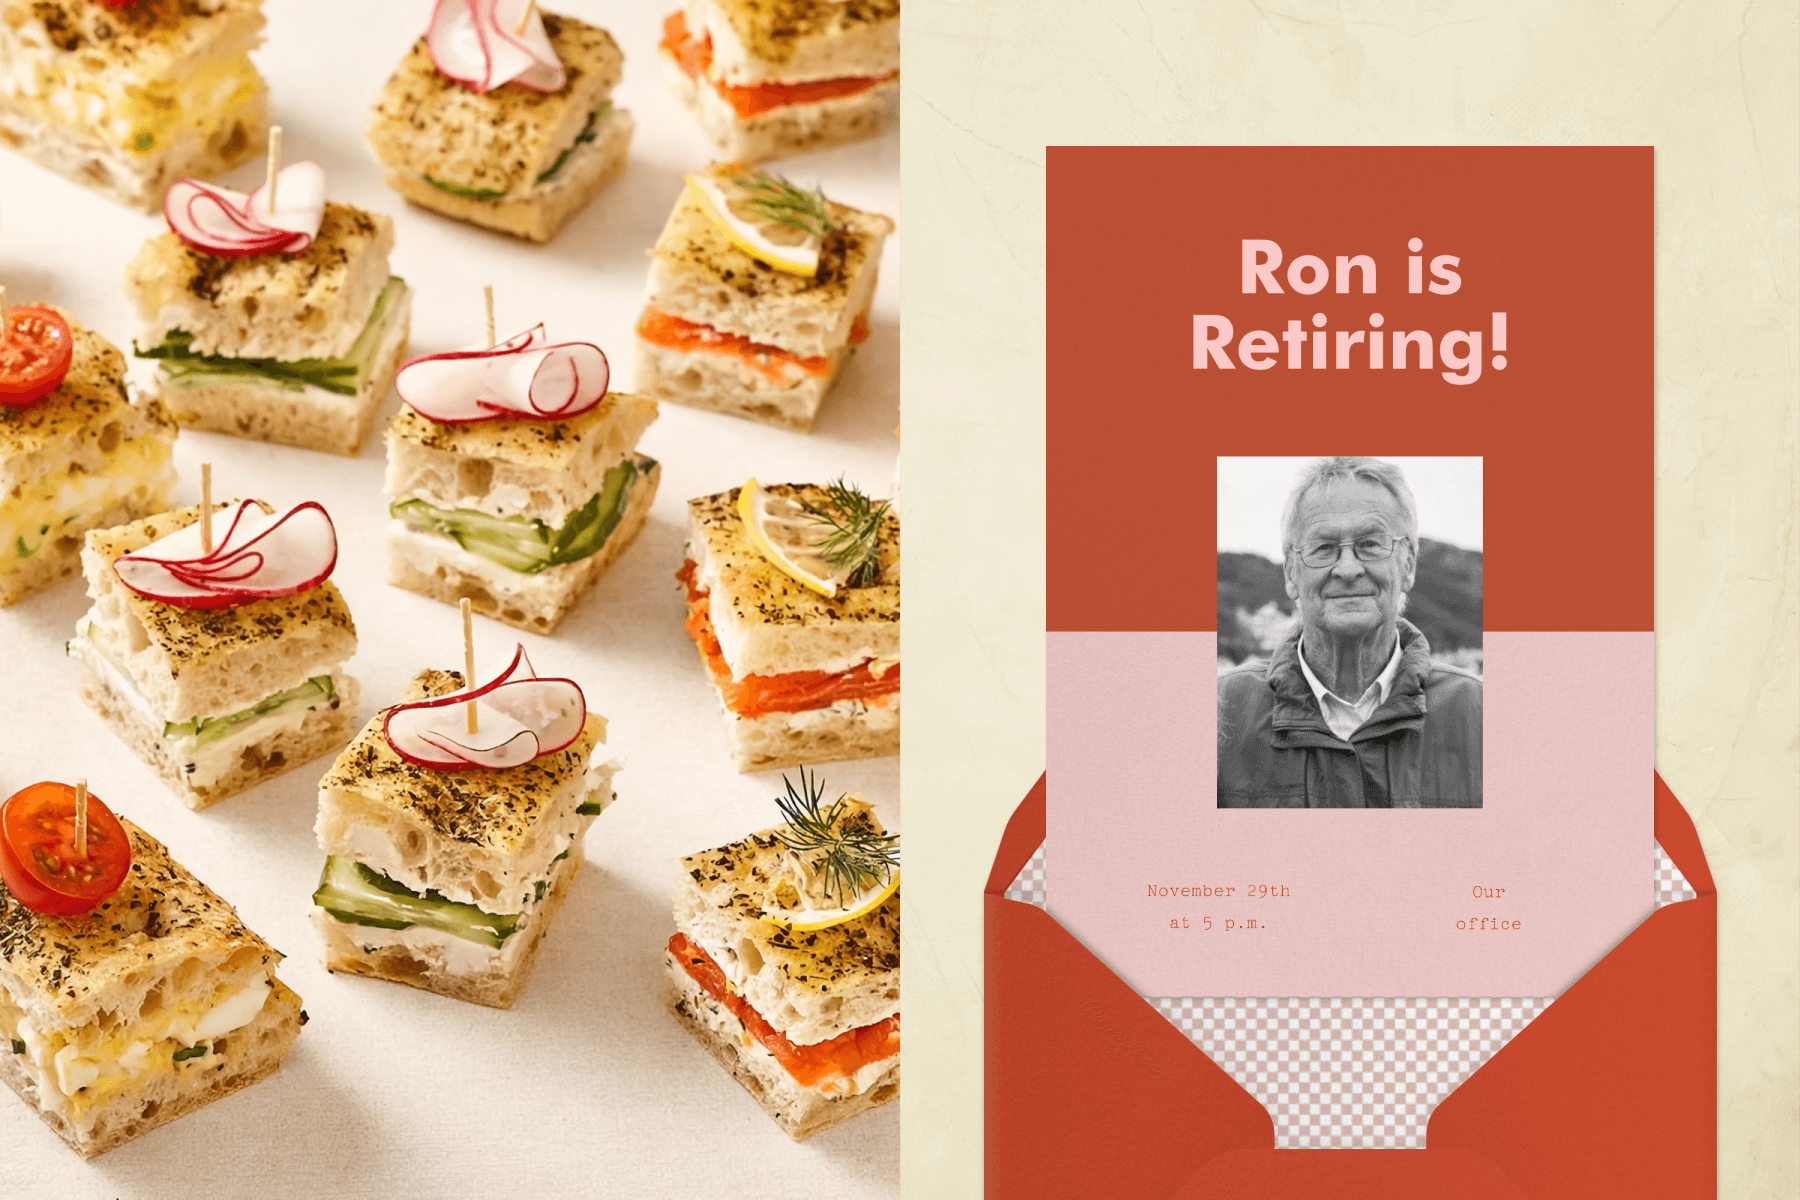 Left: Several small finger sandwiches held together with toothpicks. Right: A retirement invitation is red on top and pink on bottom with a black and white photo of an older man and the phrase “Ron is Retiring!” There is a matching red envelope with a pink checkered liner.